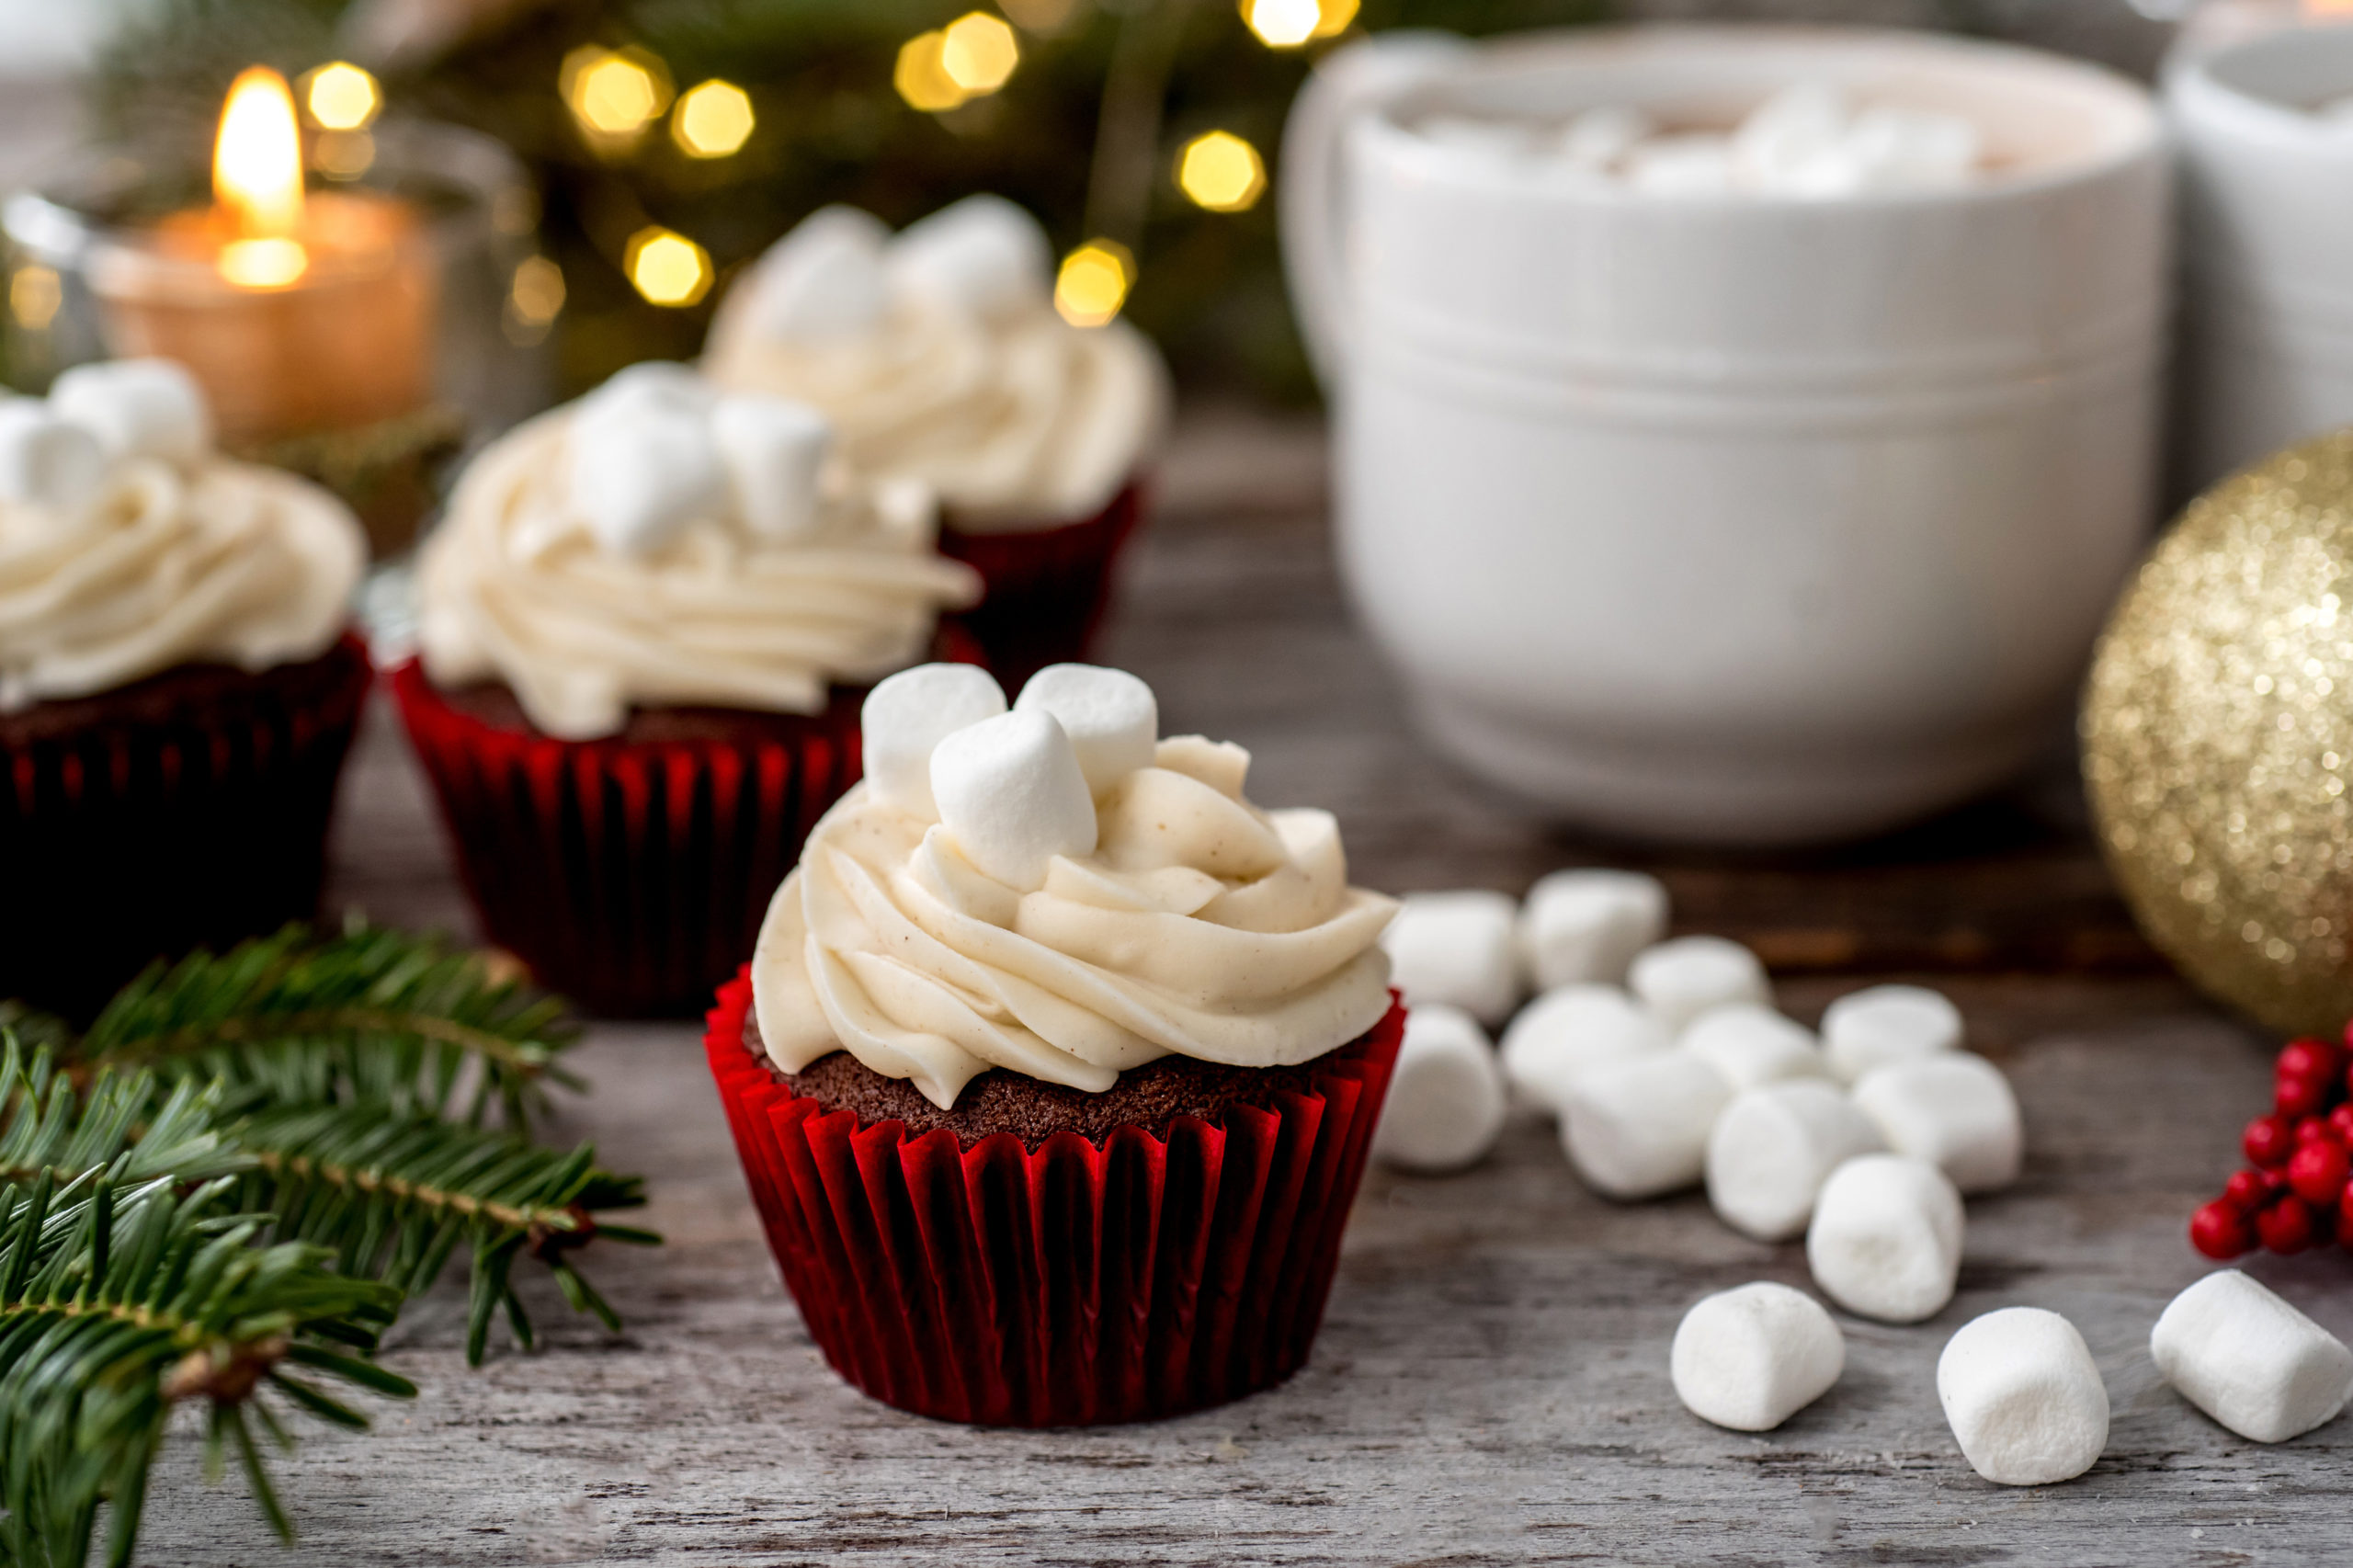 Hot Cocoa Cupcake from The Cupcake Collection